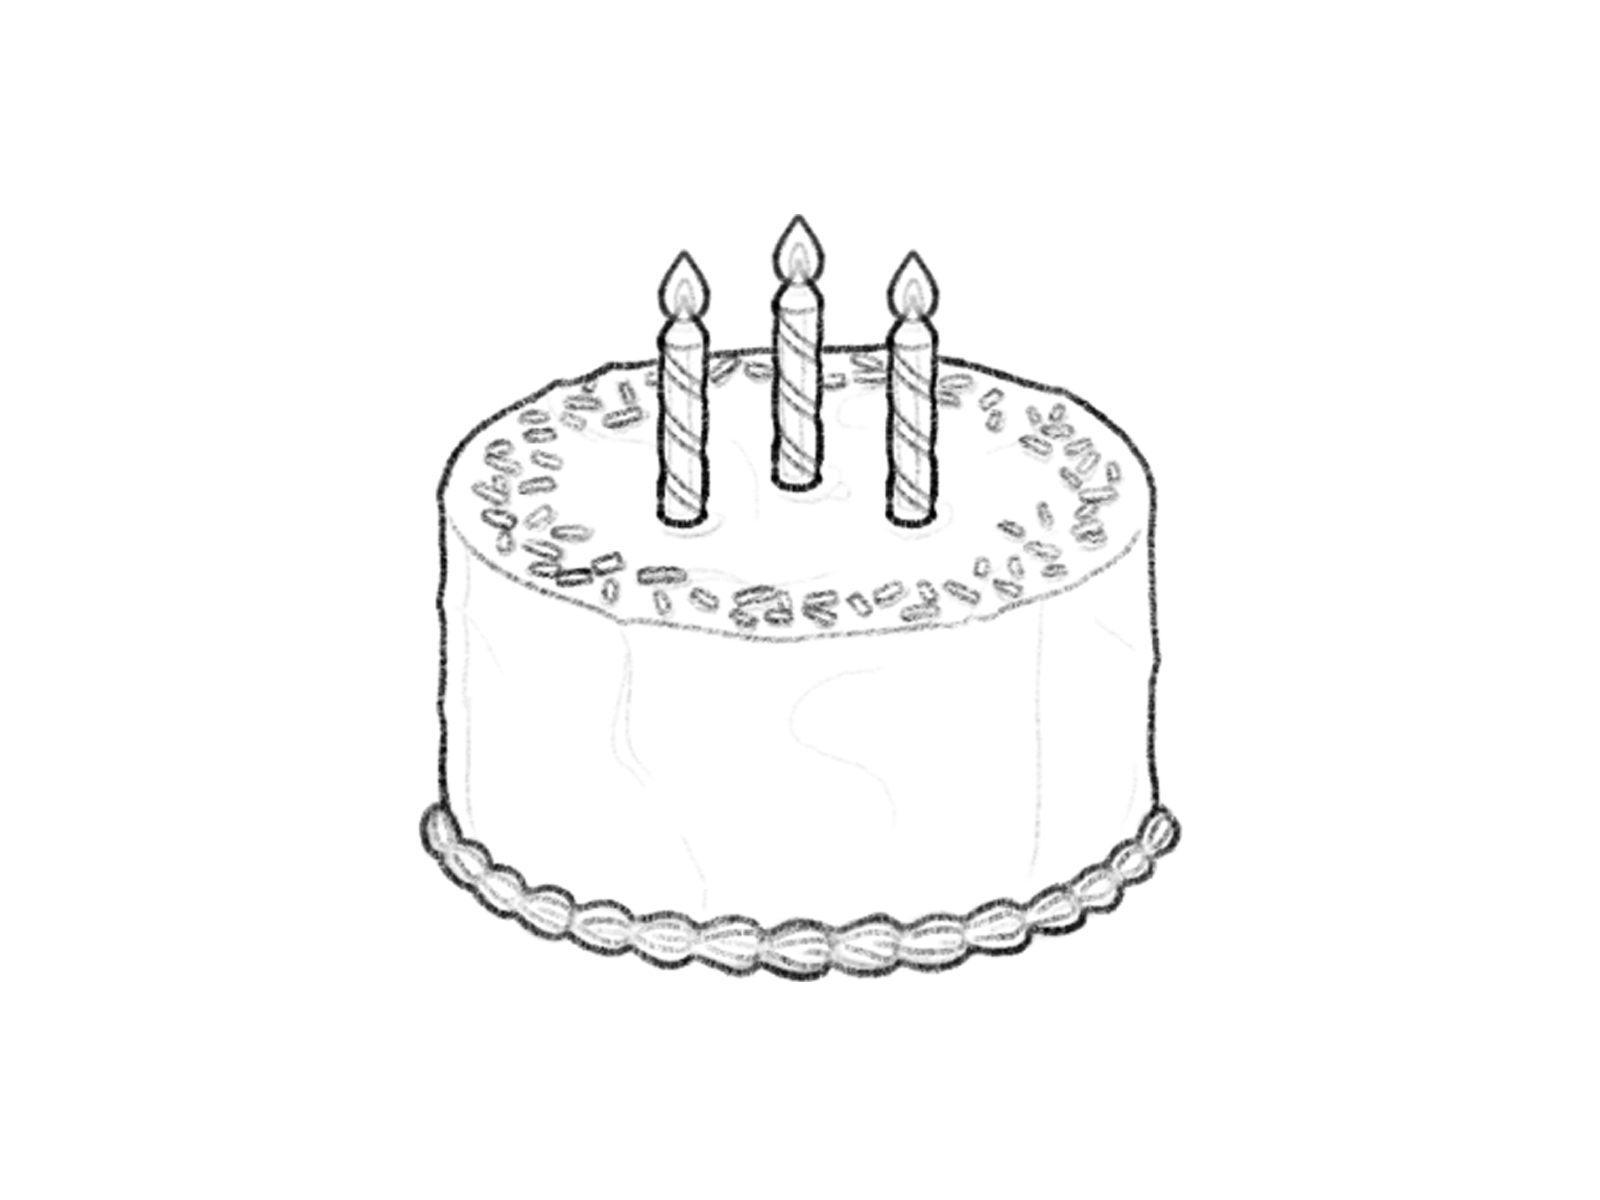 Birthday Cake Five Candles Drawing High-Res Vector Graphic - Getty Images